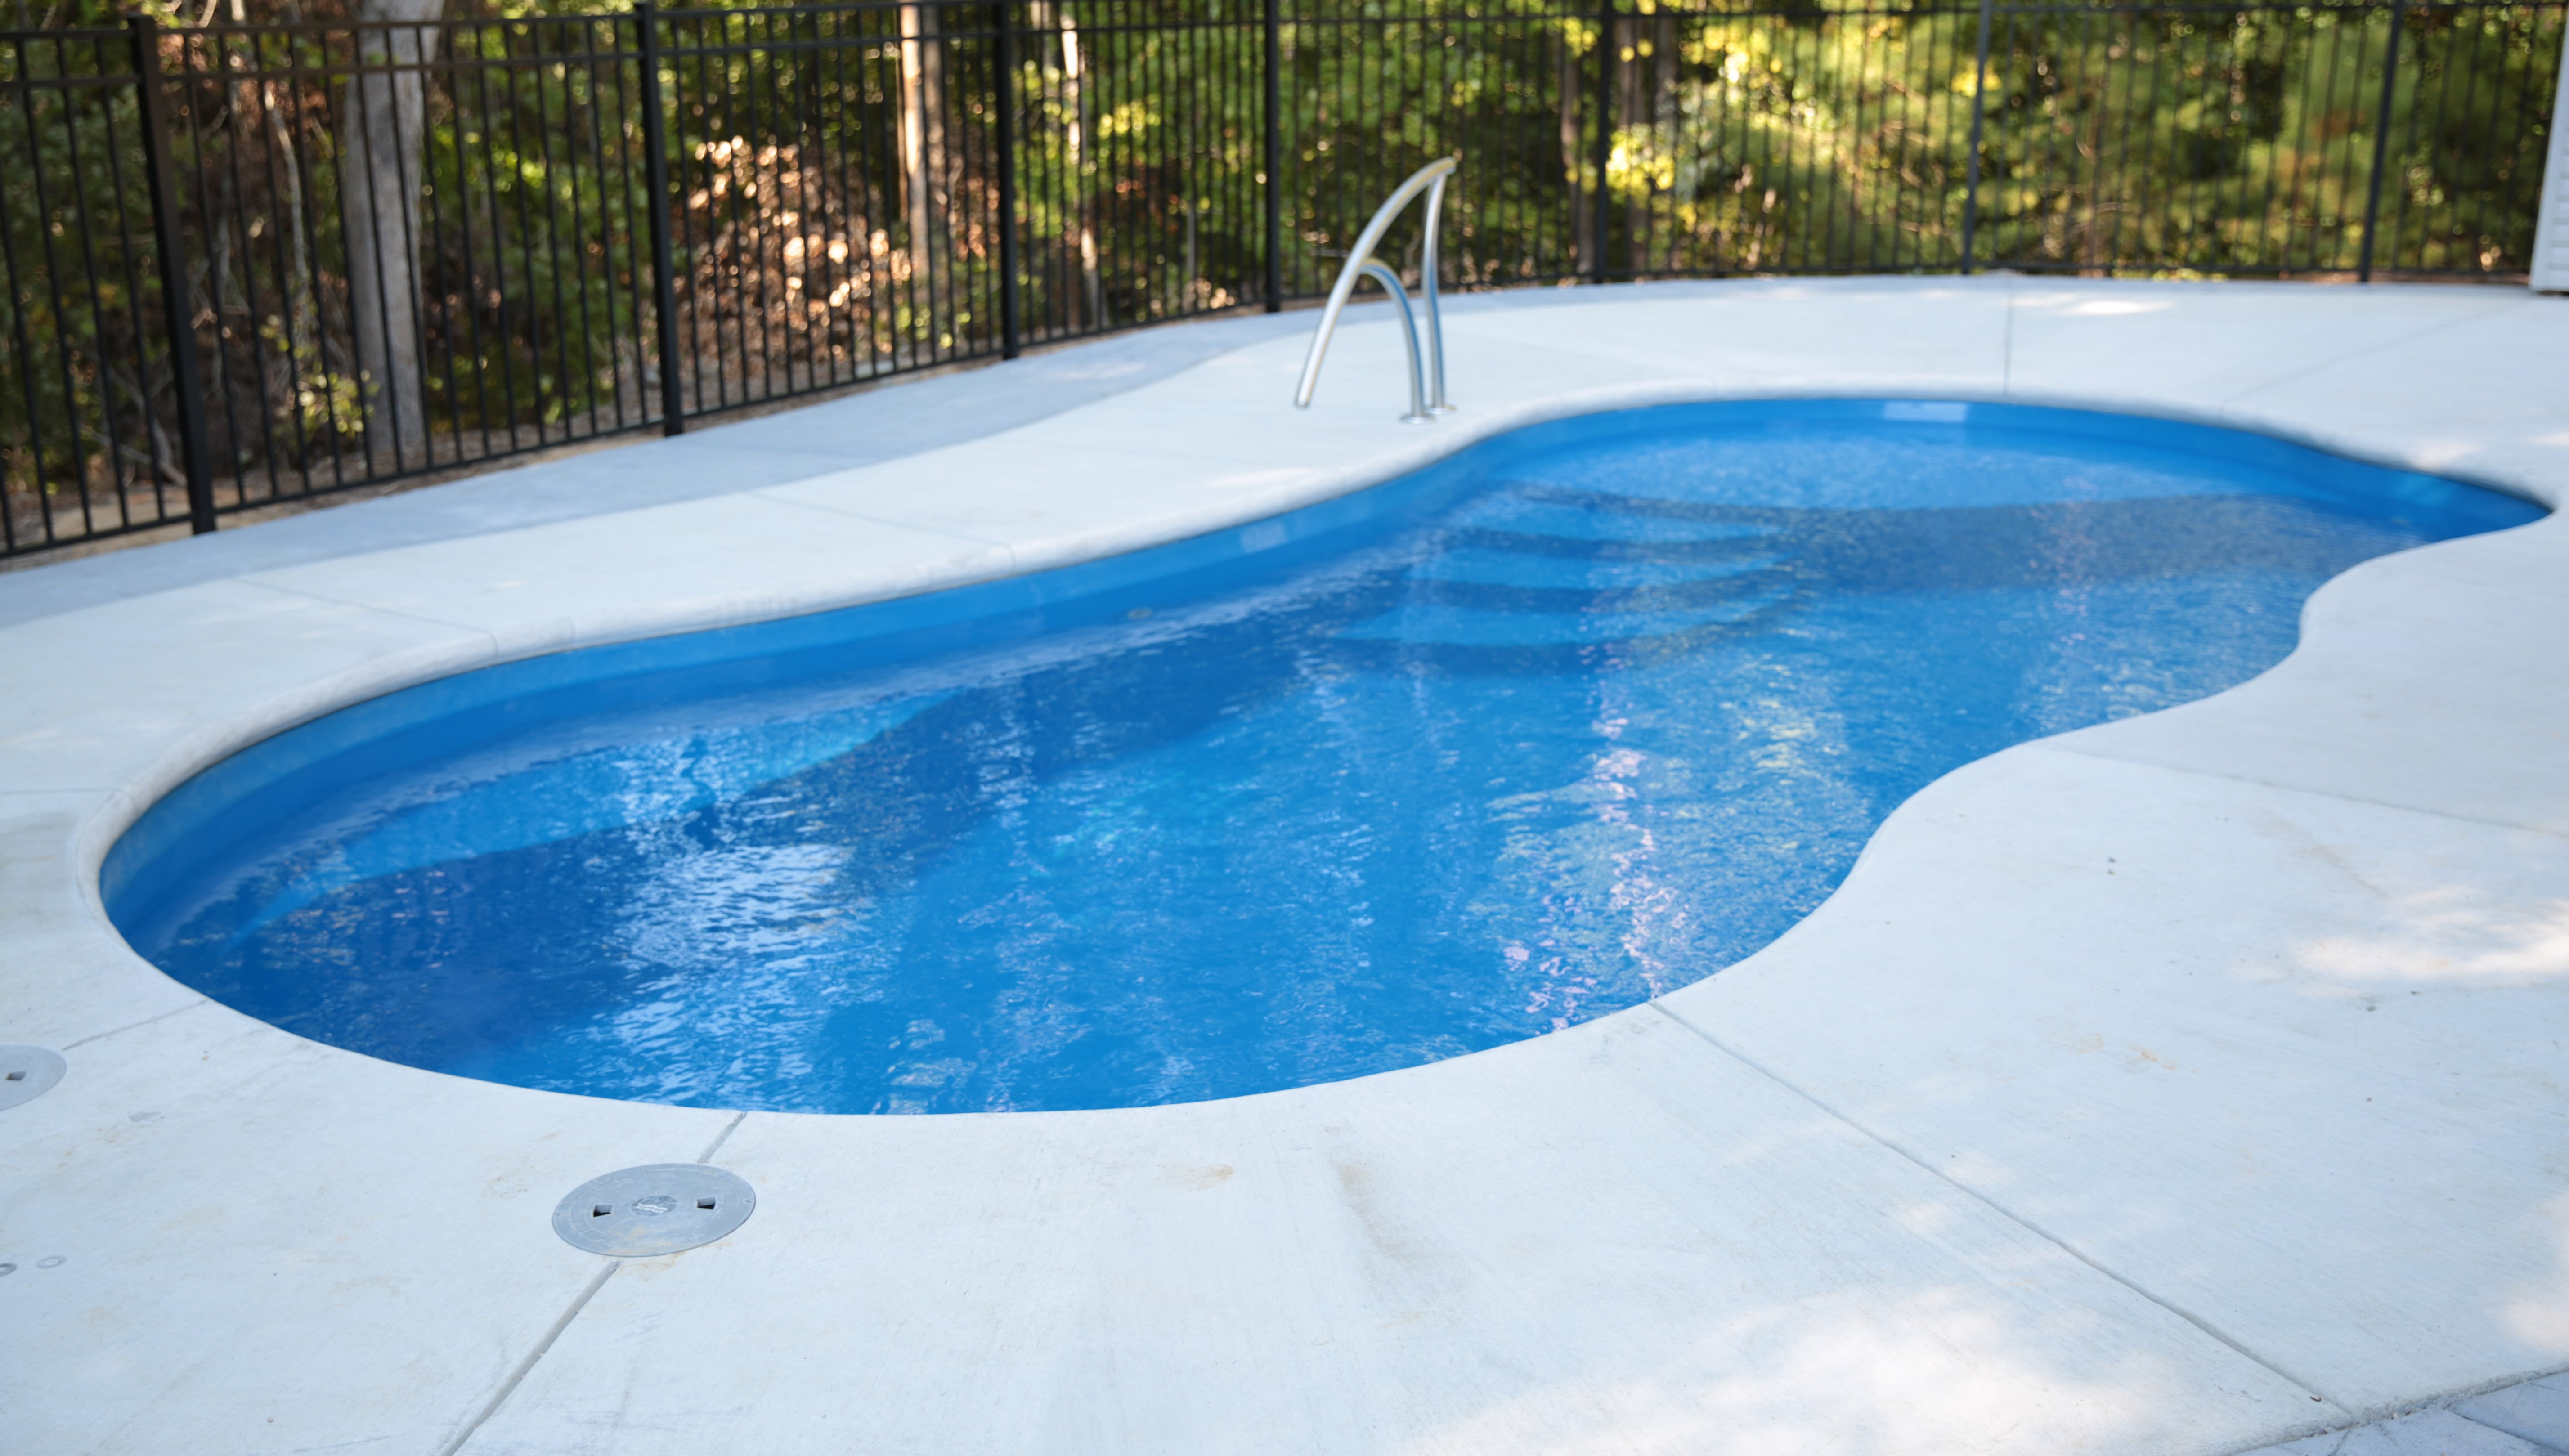 25 Small Inground Pool Ideas for All Budgets